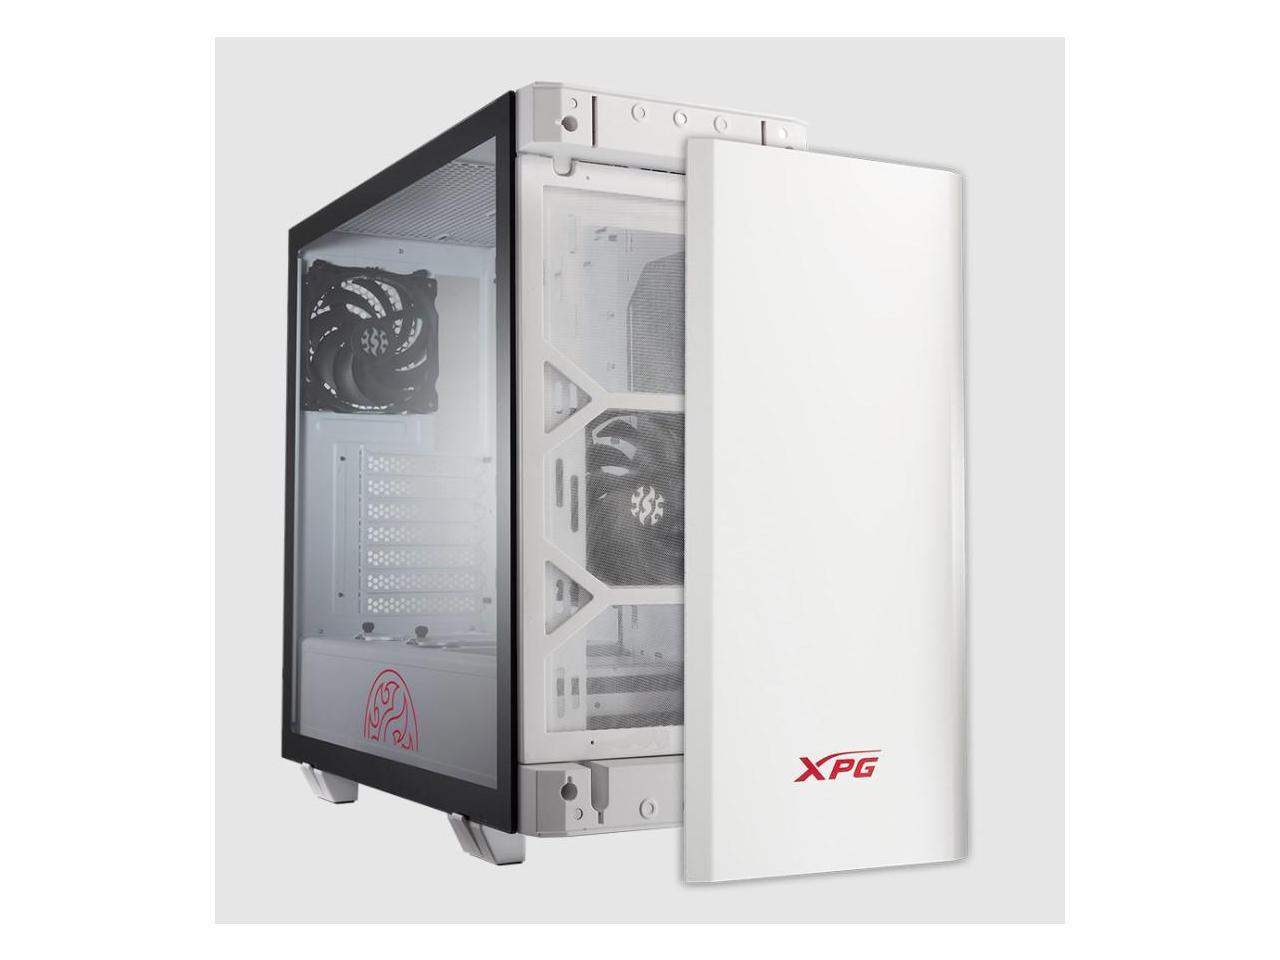 XPG INVADER ATX Mid Tower Chassis -White - INVADER-WHCWW - image 2 of 8